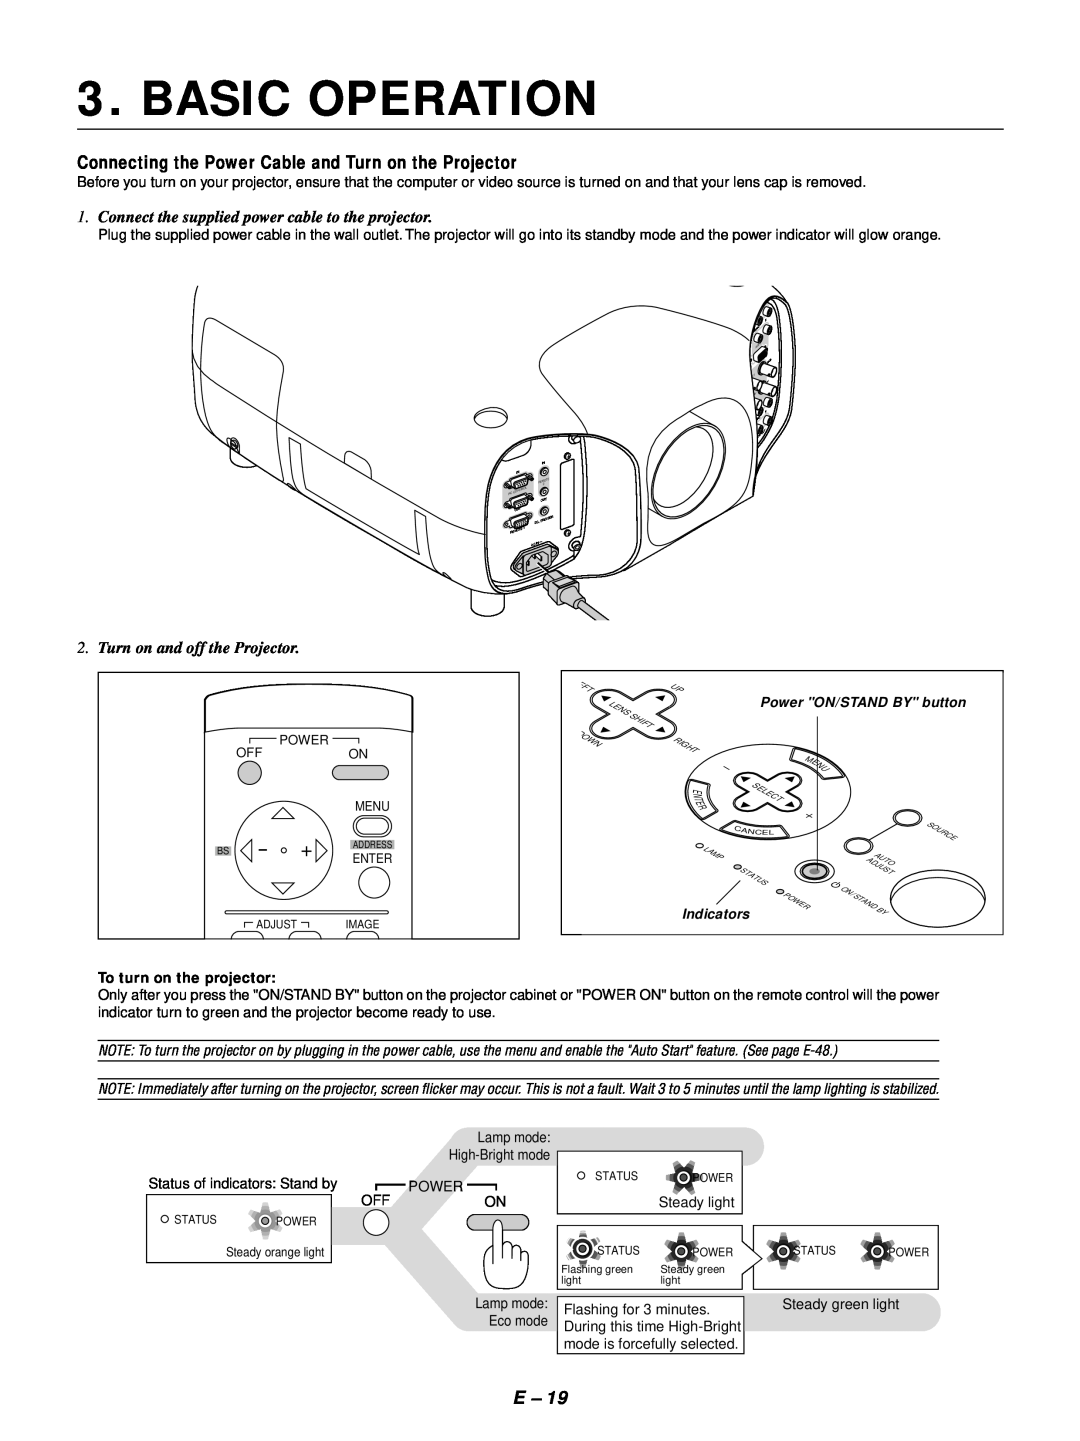 NEC GT1150 user manual Basic Operation, Connecting the Power Cable and Turn on the Projector, Turn on and off the Projector 